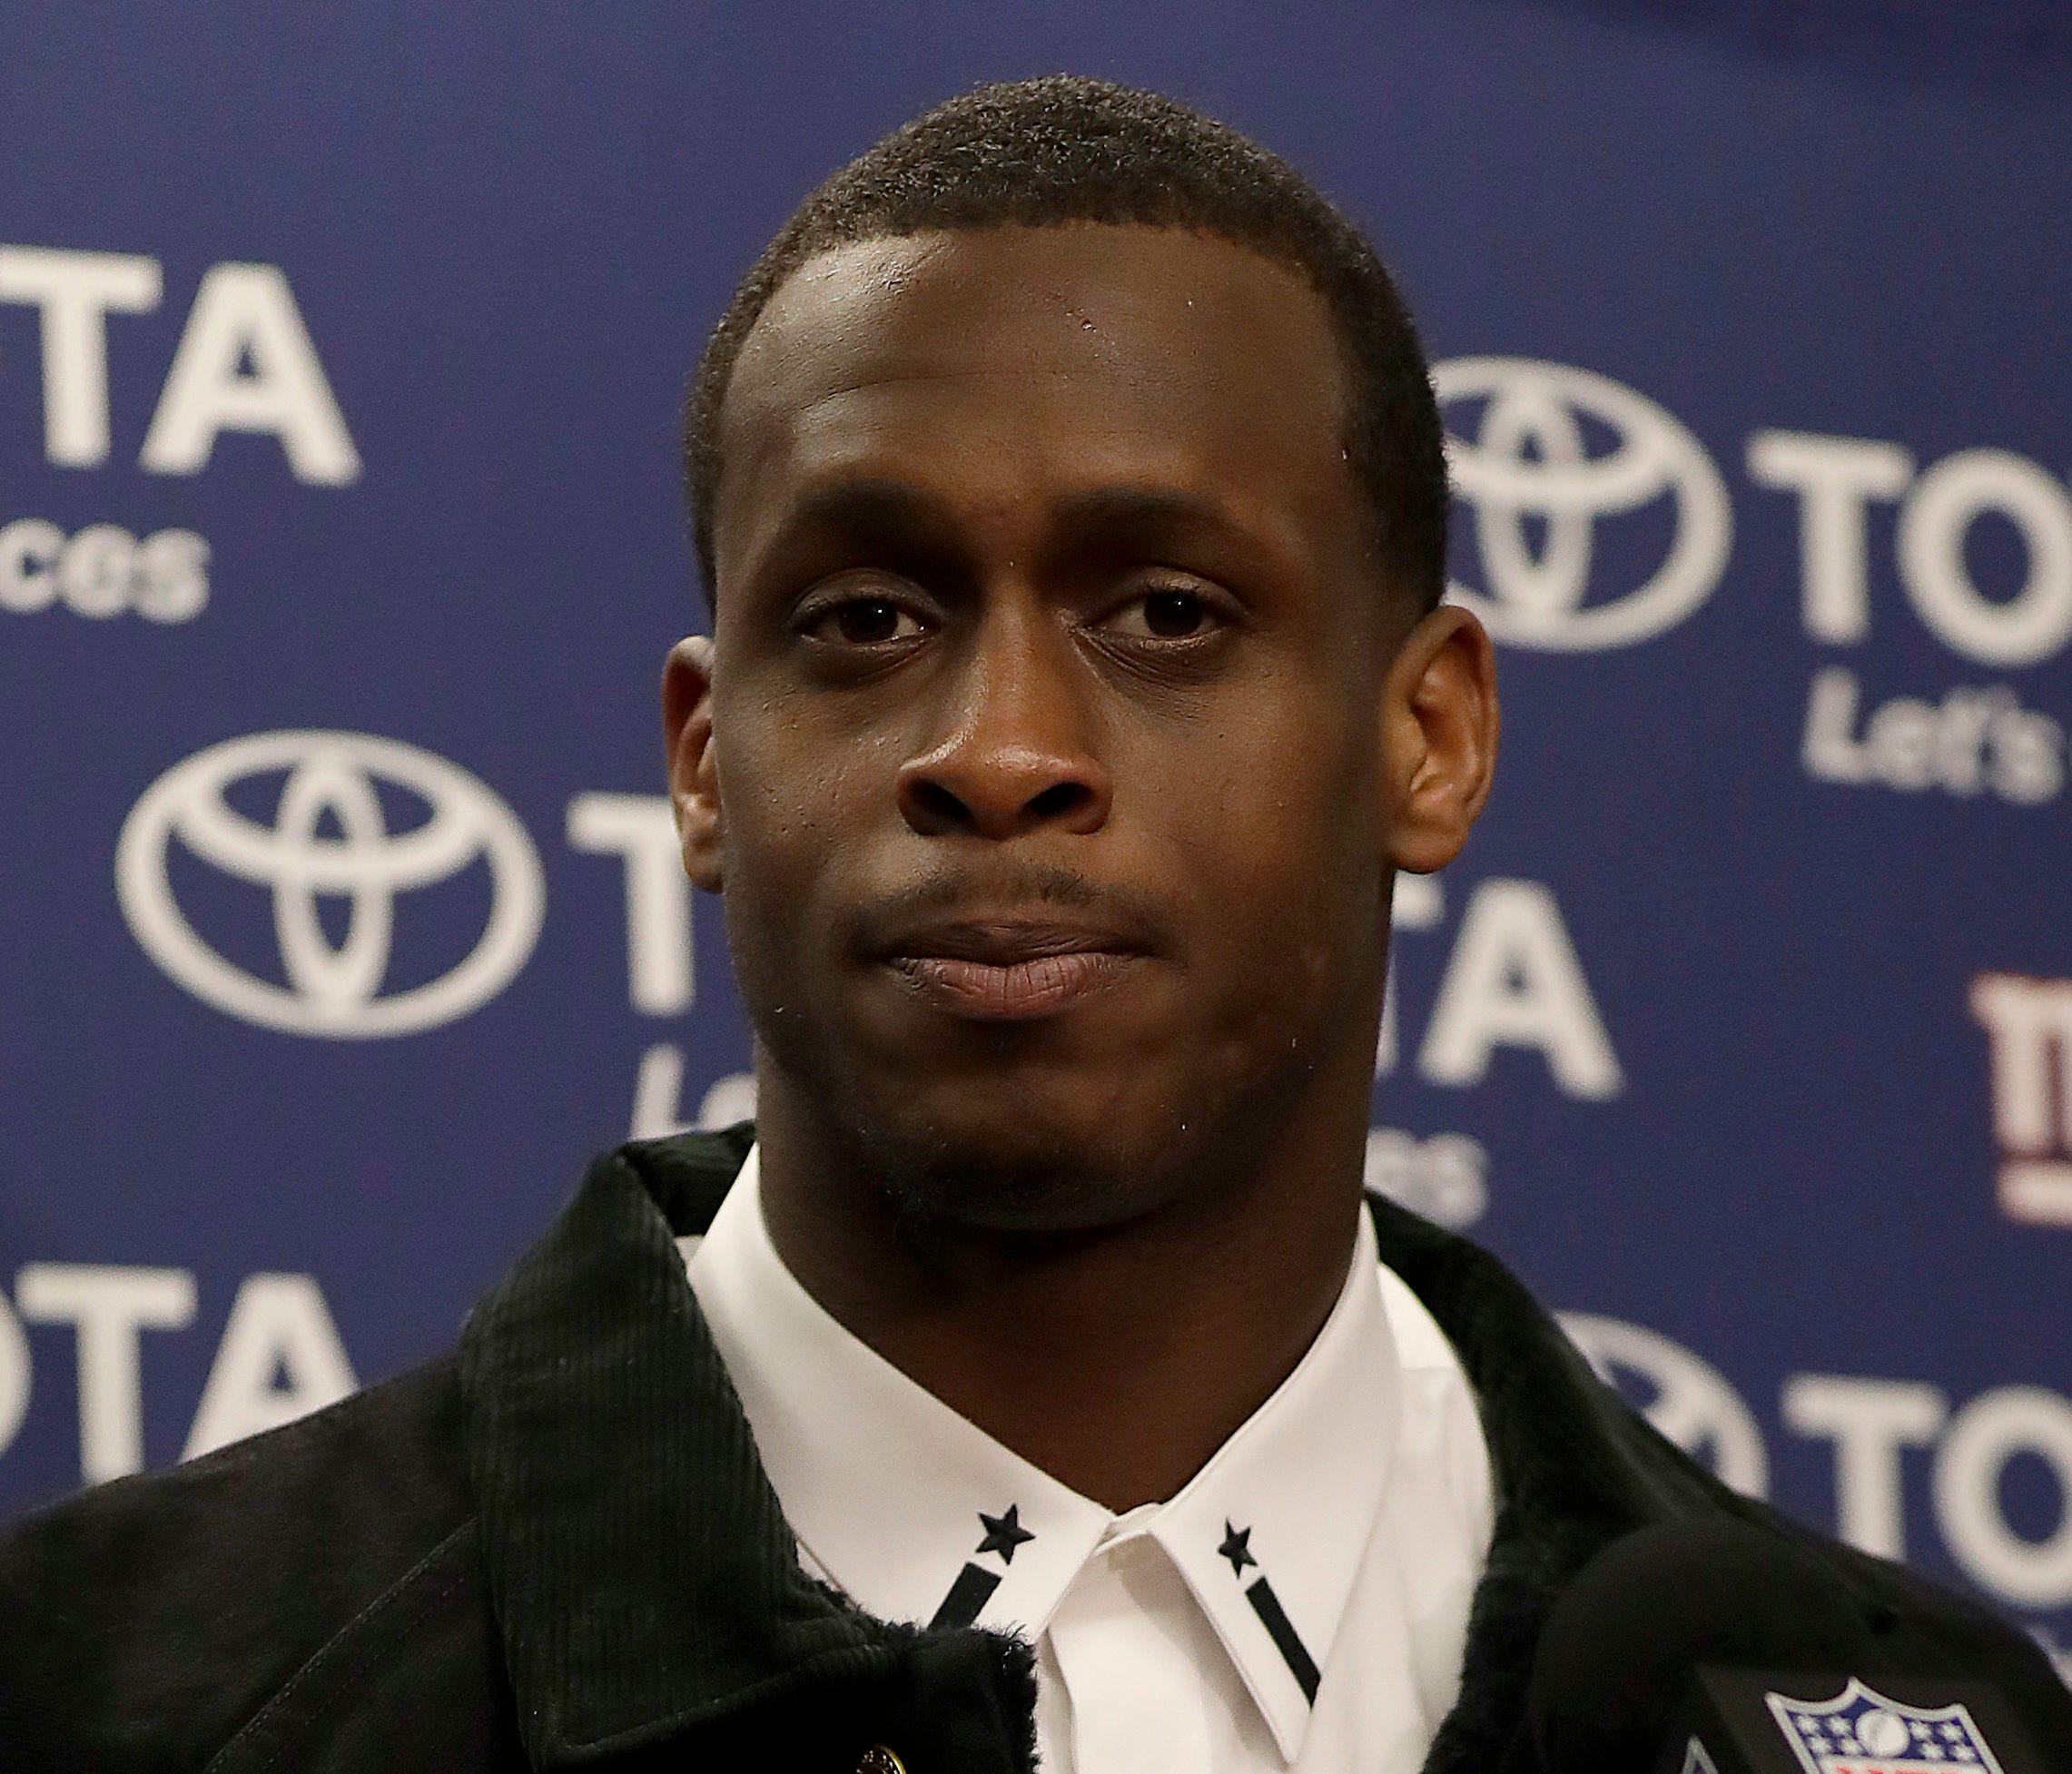 New York Giants quarterback Geno Smith speaks at a news conference after an NFL football game between the Oakland Raiders and the Giants in Oakland, Calif., Sunday, Dec. 3, 2017. (AP Photo/Marcio Jose Sanchez) ORG XMIT: OAS